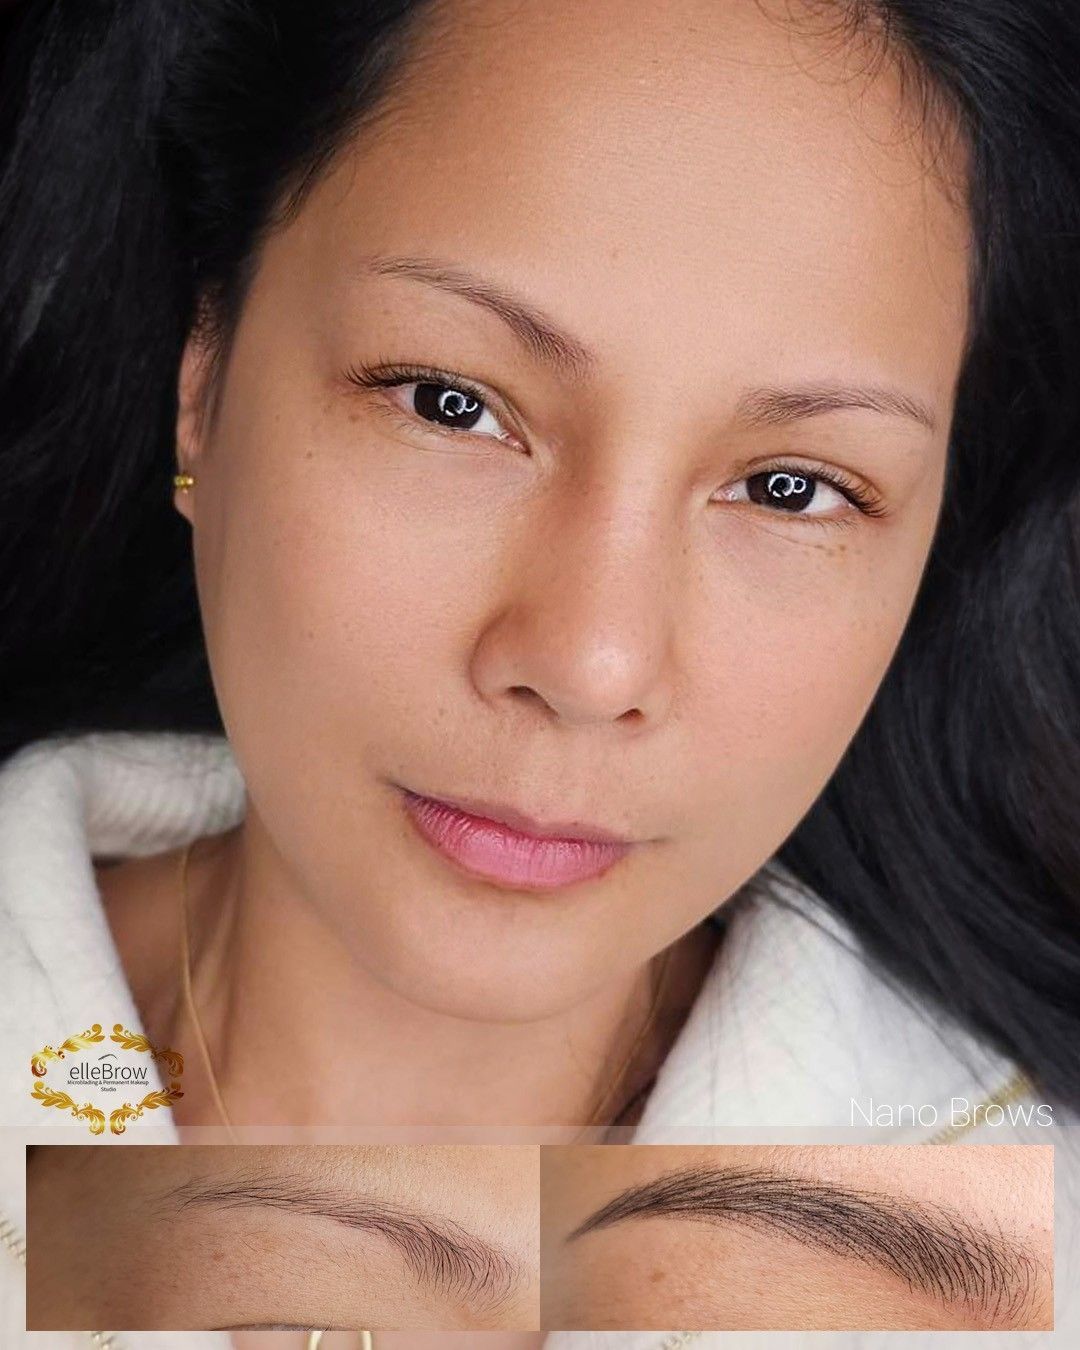 a before and after photo of a woman 's eyebrows - nano brows